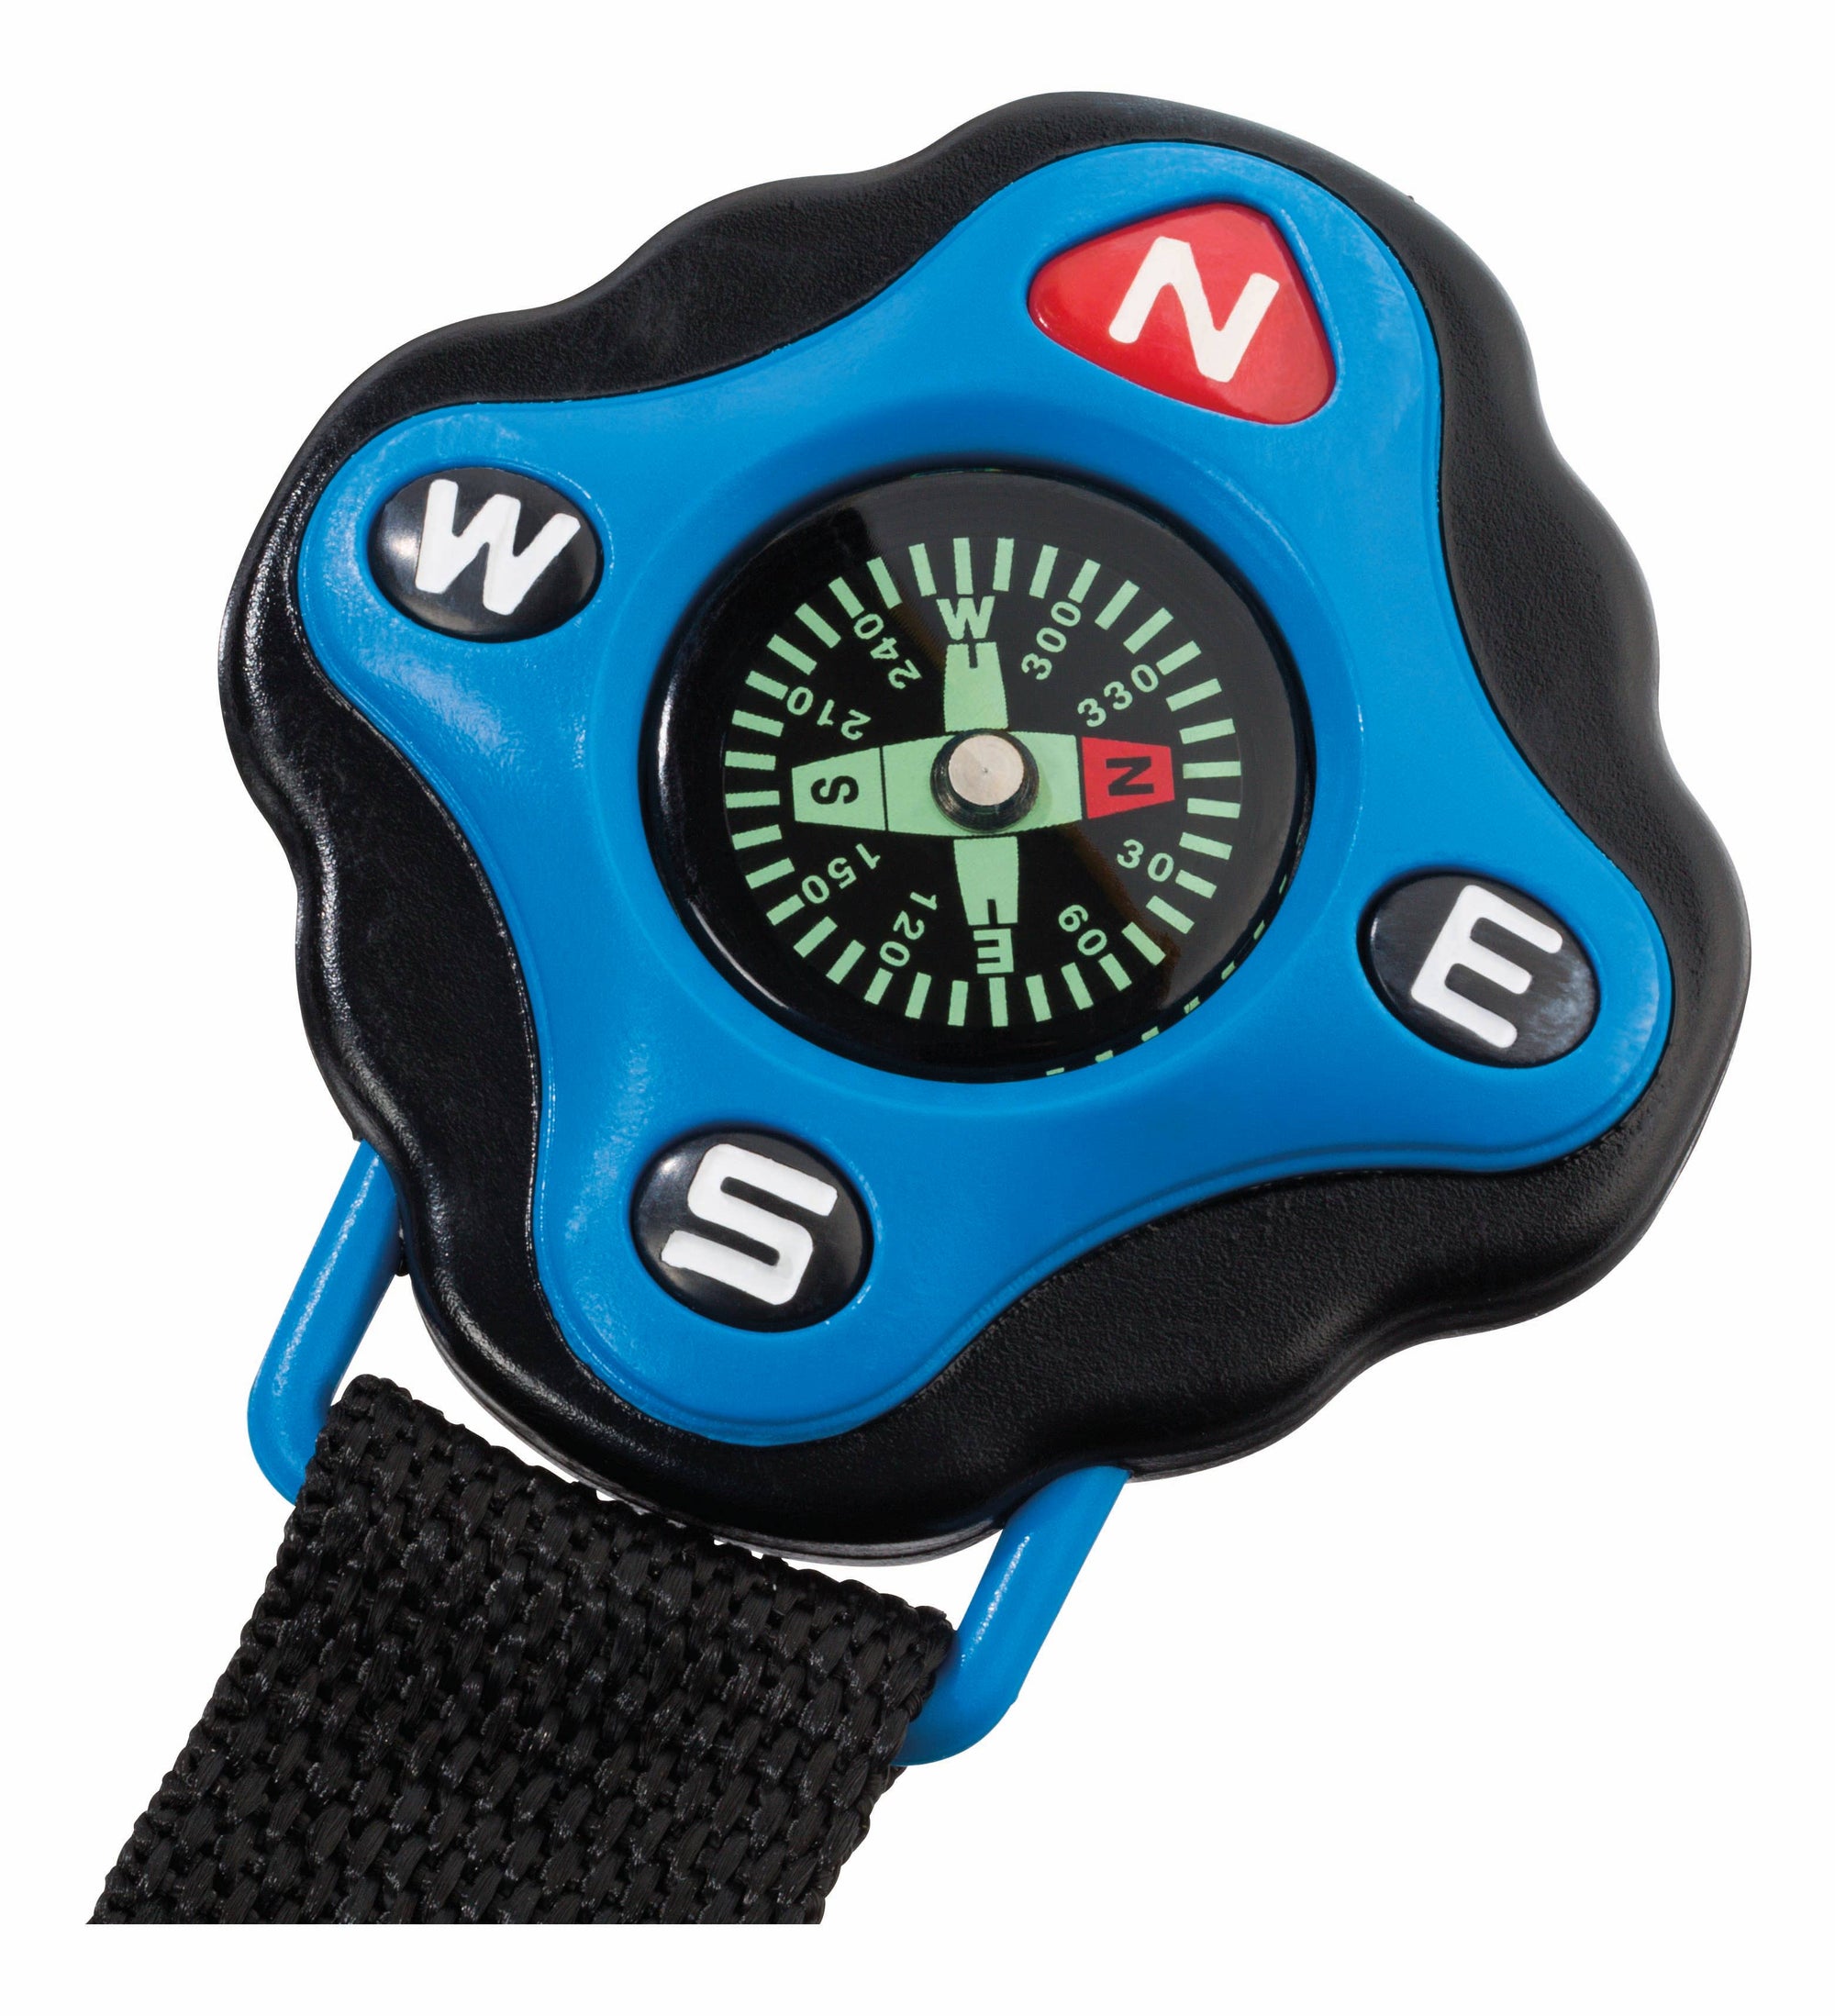 A colorful children's Outdoor Discovery Backyard Exploration Clip-On Compass with blue casing, featuring large red n, green s, and white e, w buttons, attached to a black wrist strap for outdoor discovery, isolated on a white background.